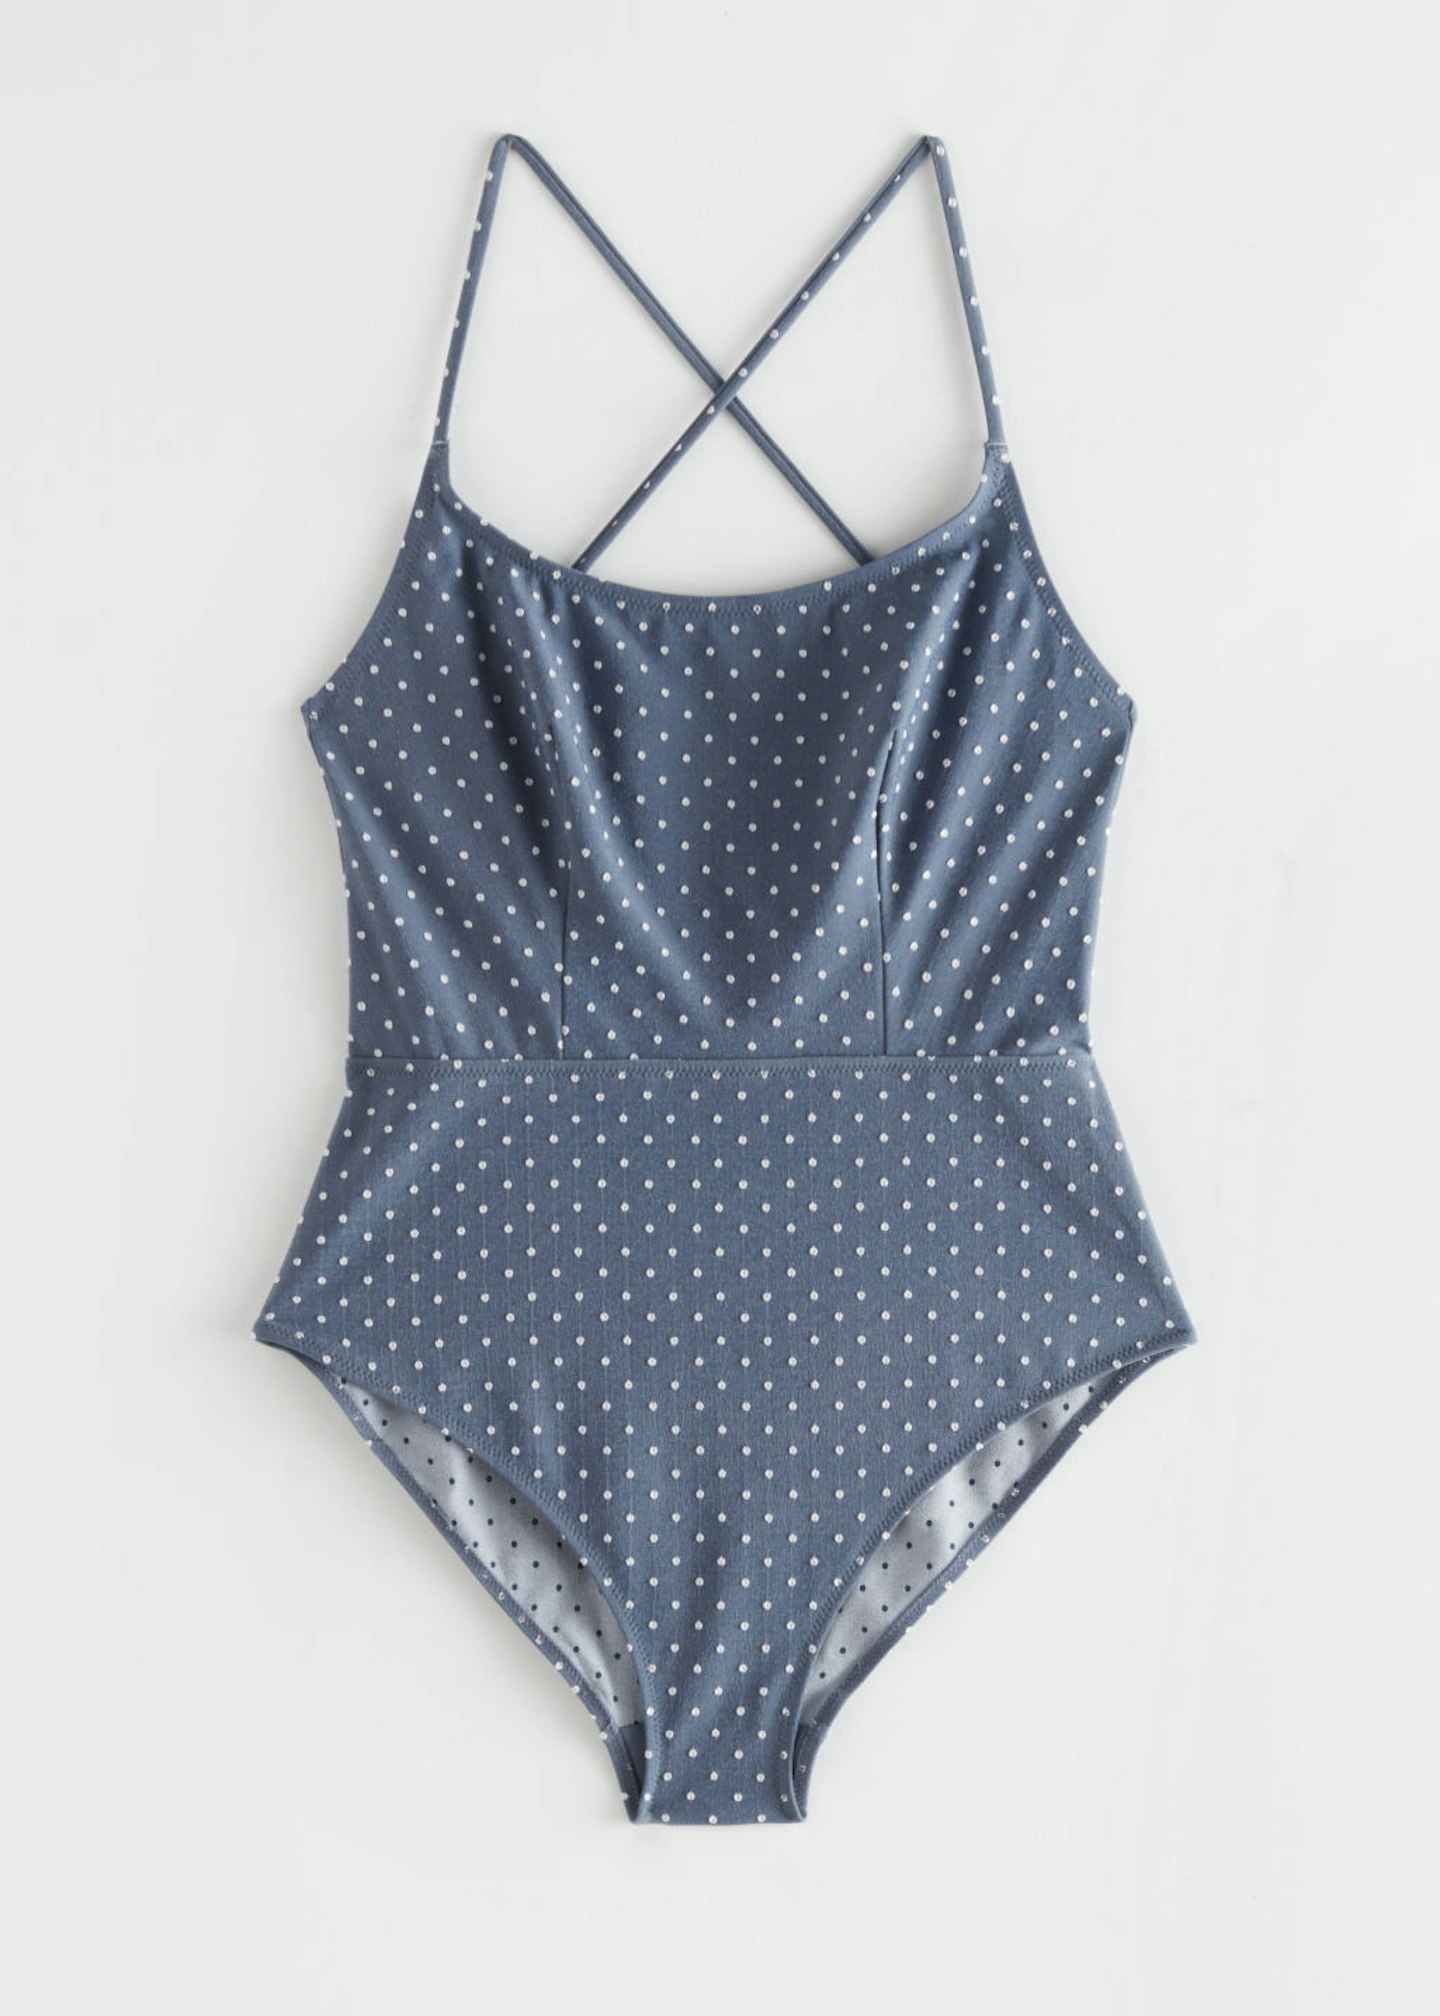 & Other Stories, Polka Dot Swimsuit, £55